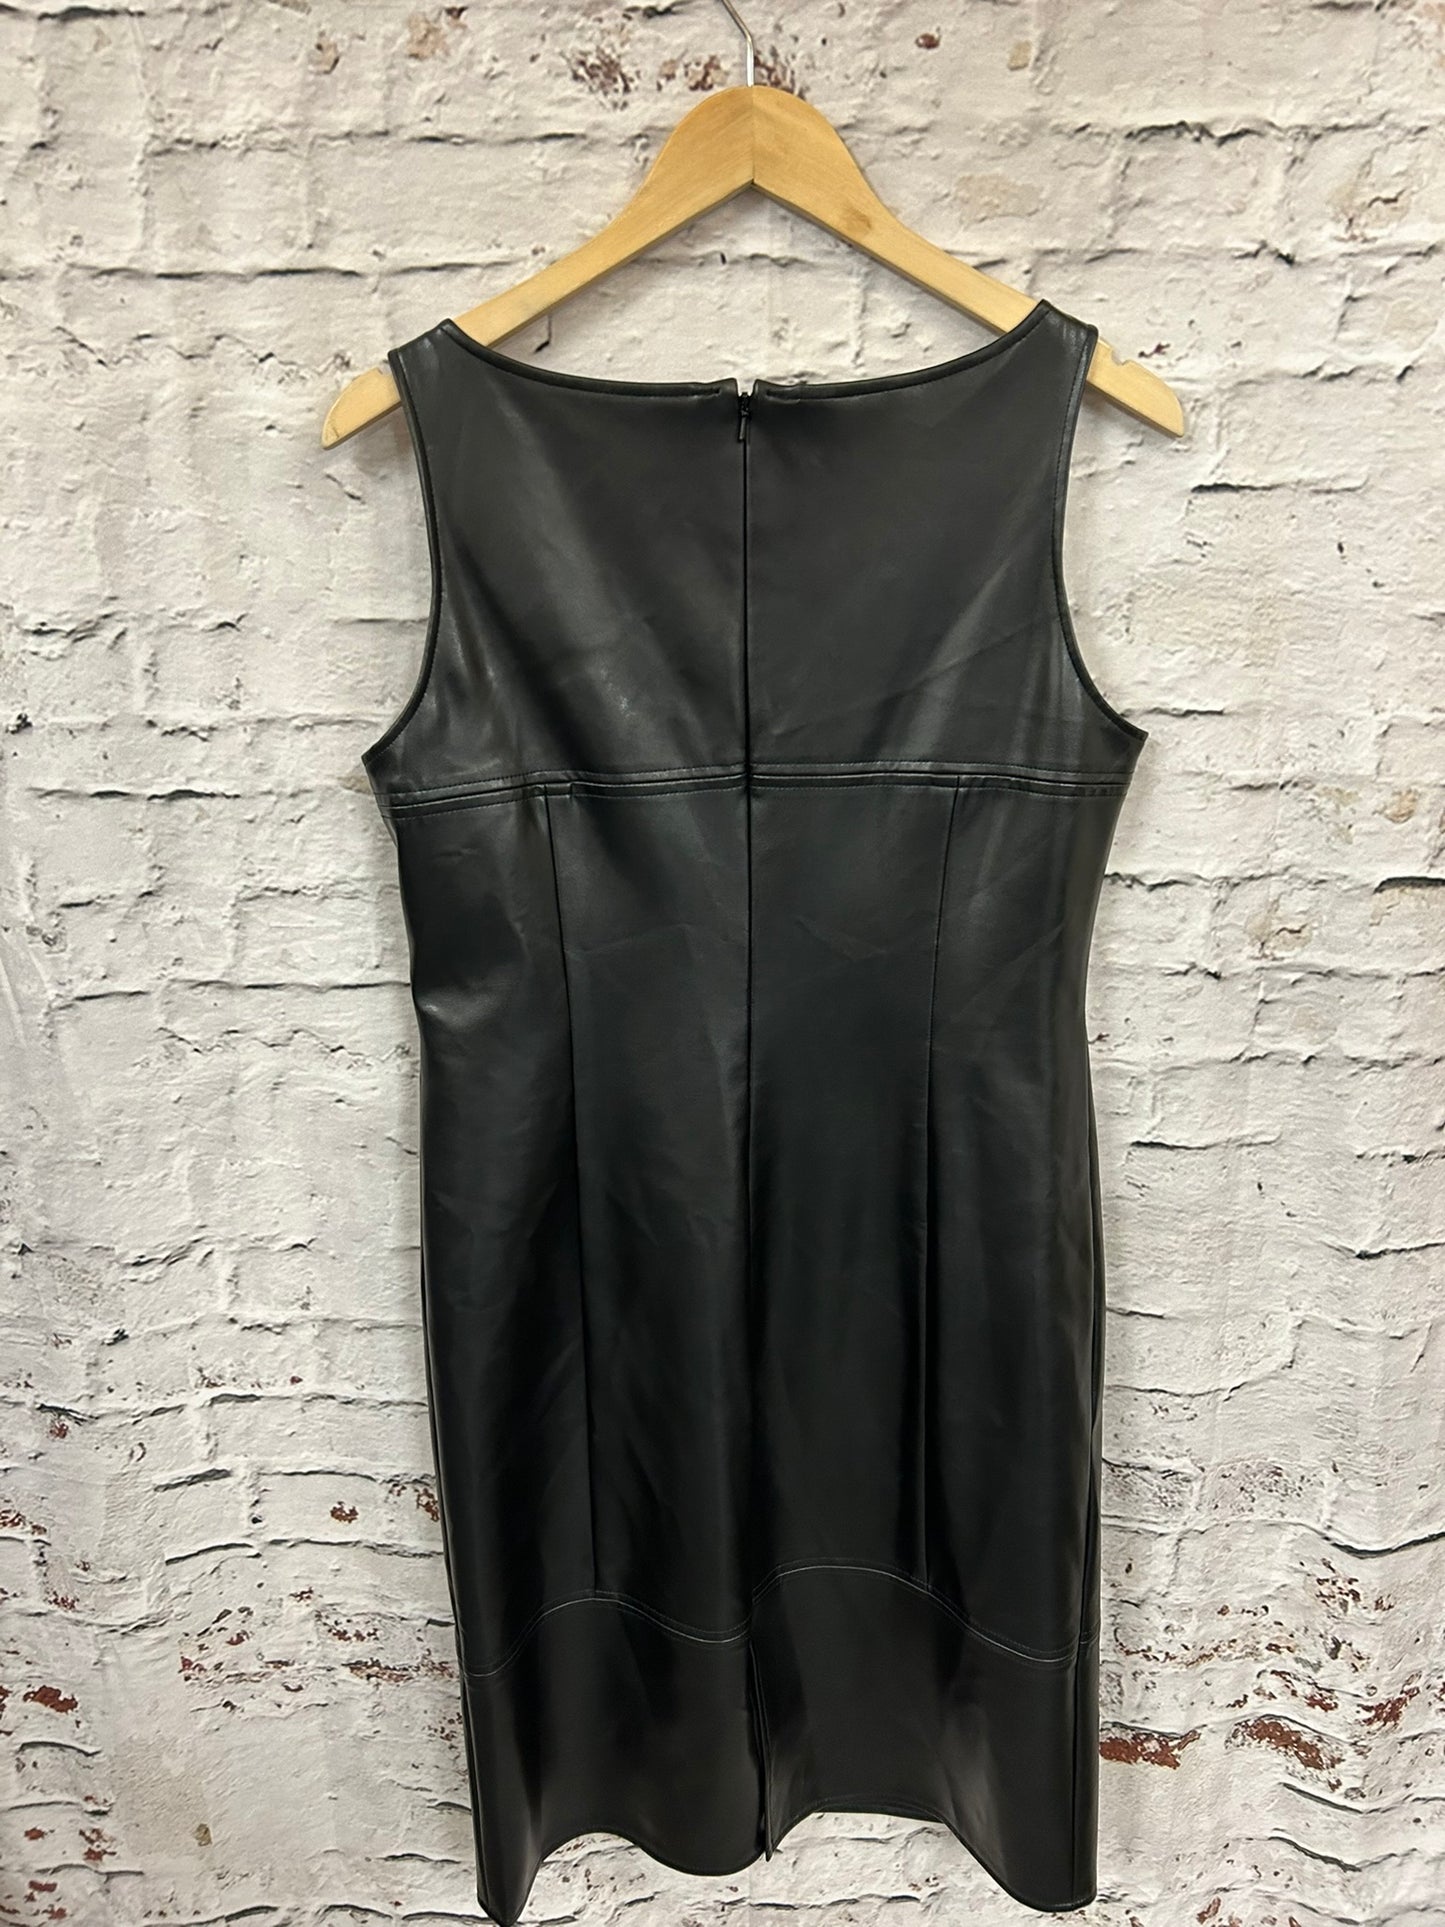 1990s Leather Look Dress Size 12